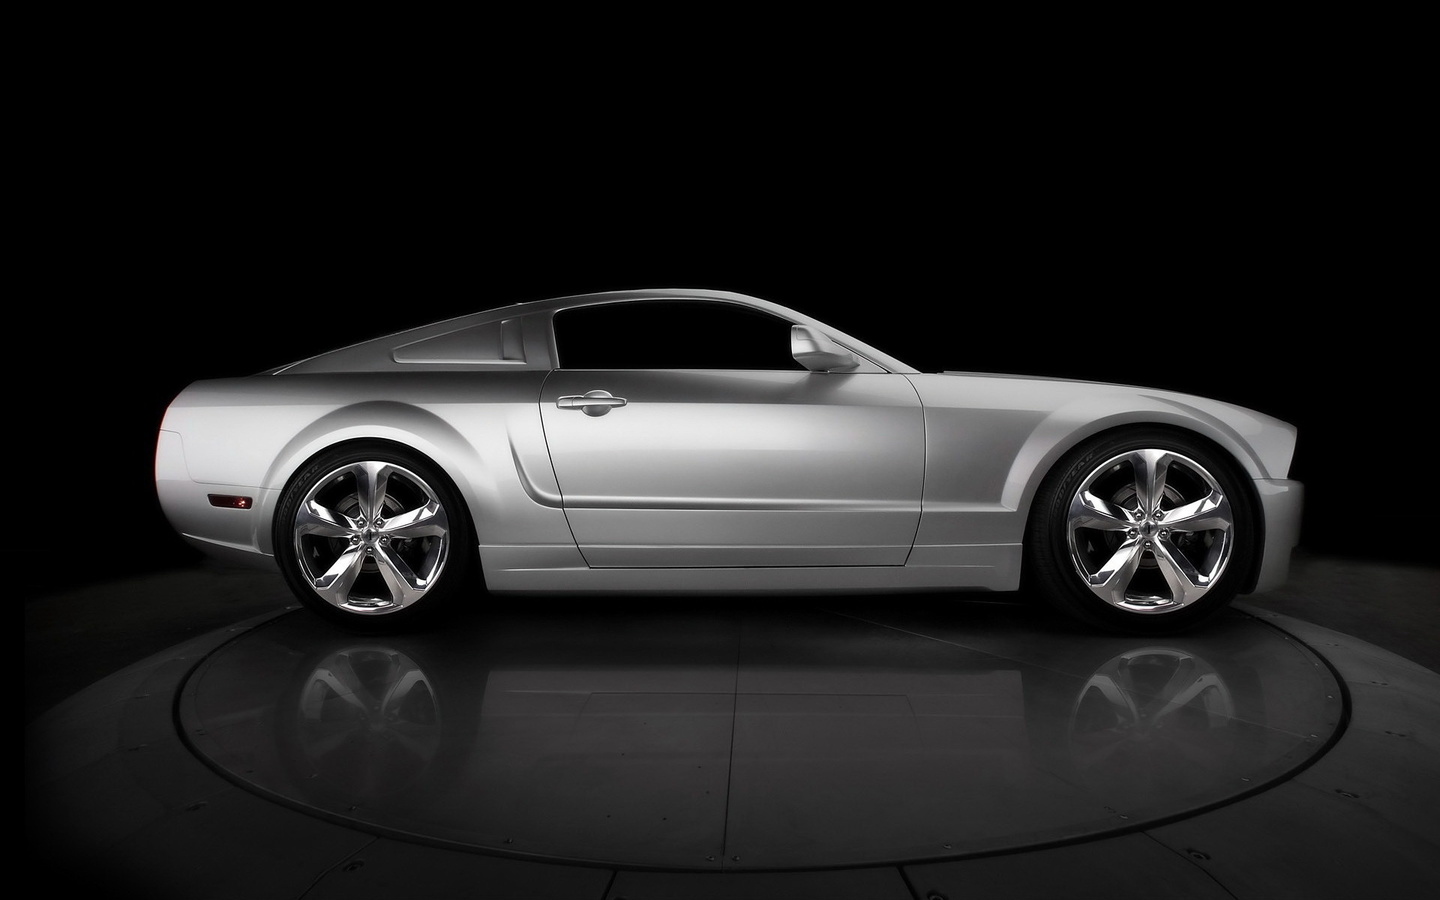 2009, Iacocca, silver, bok, ford, anniversary, mustang, 45th